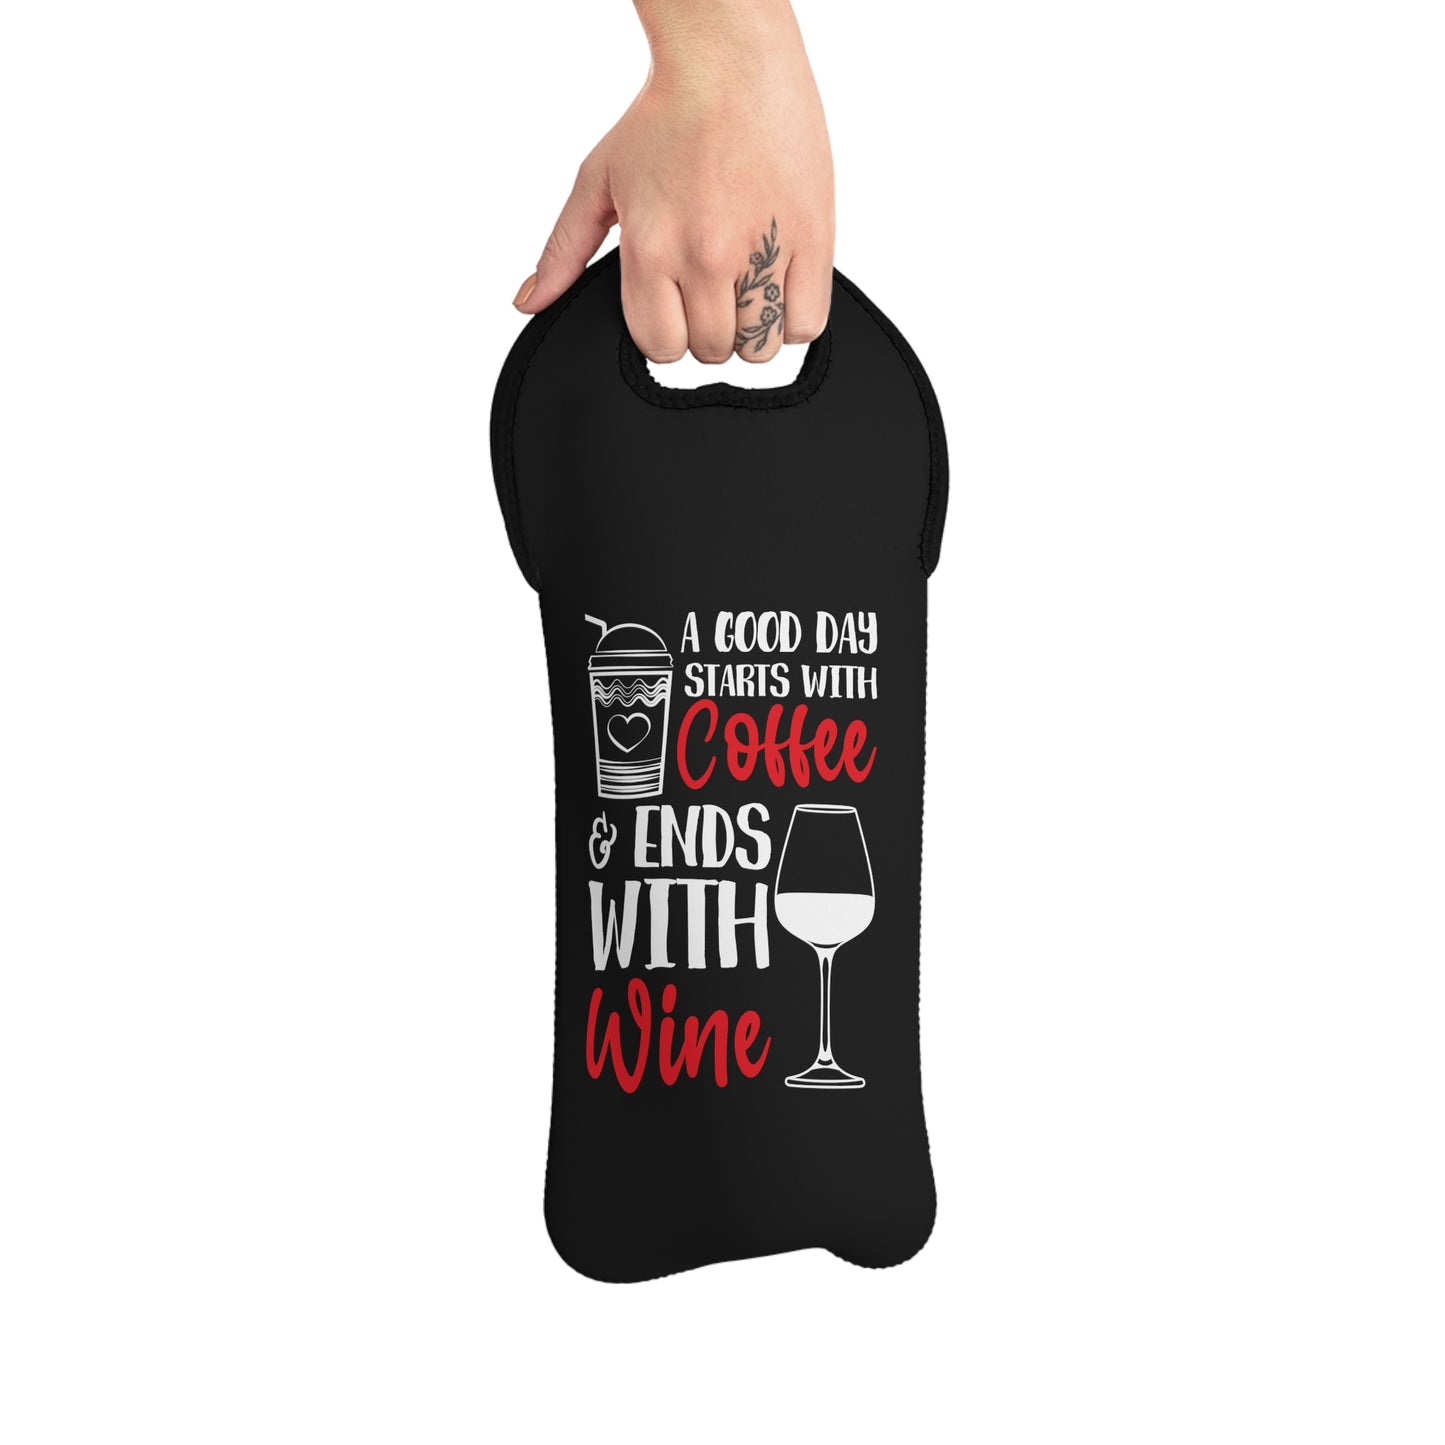 Coffee Ends With Wine Wine Tote Bag